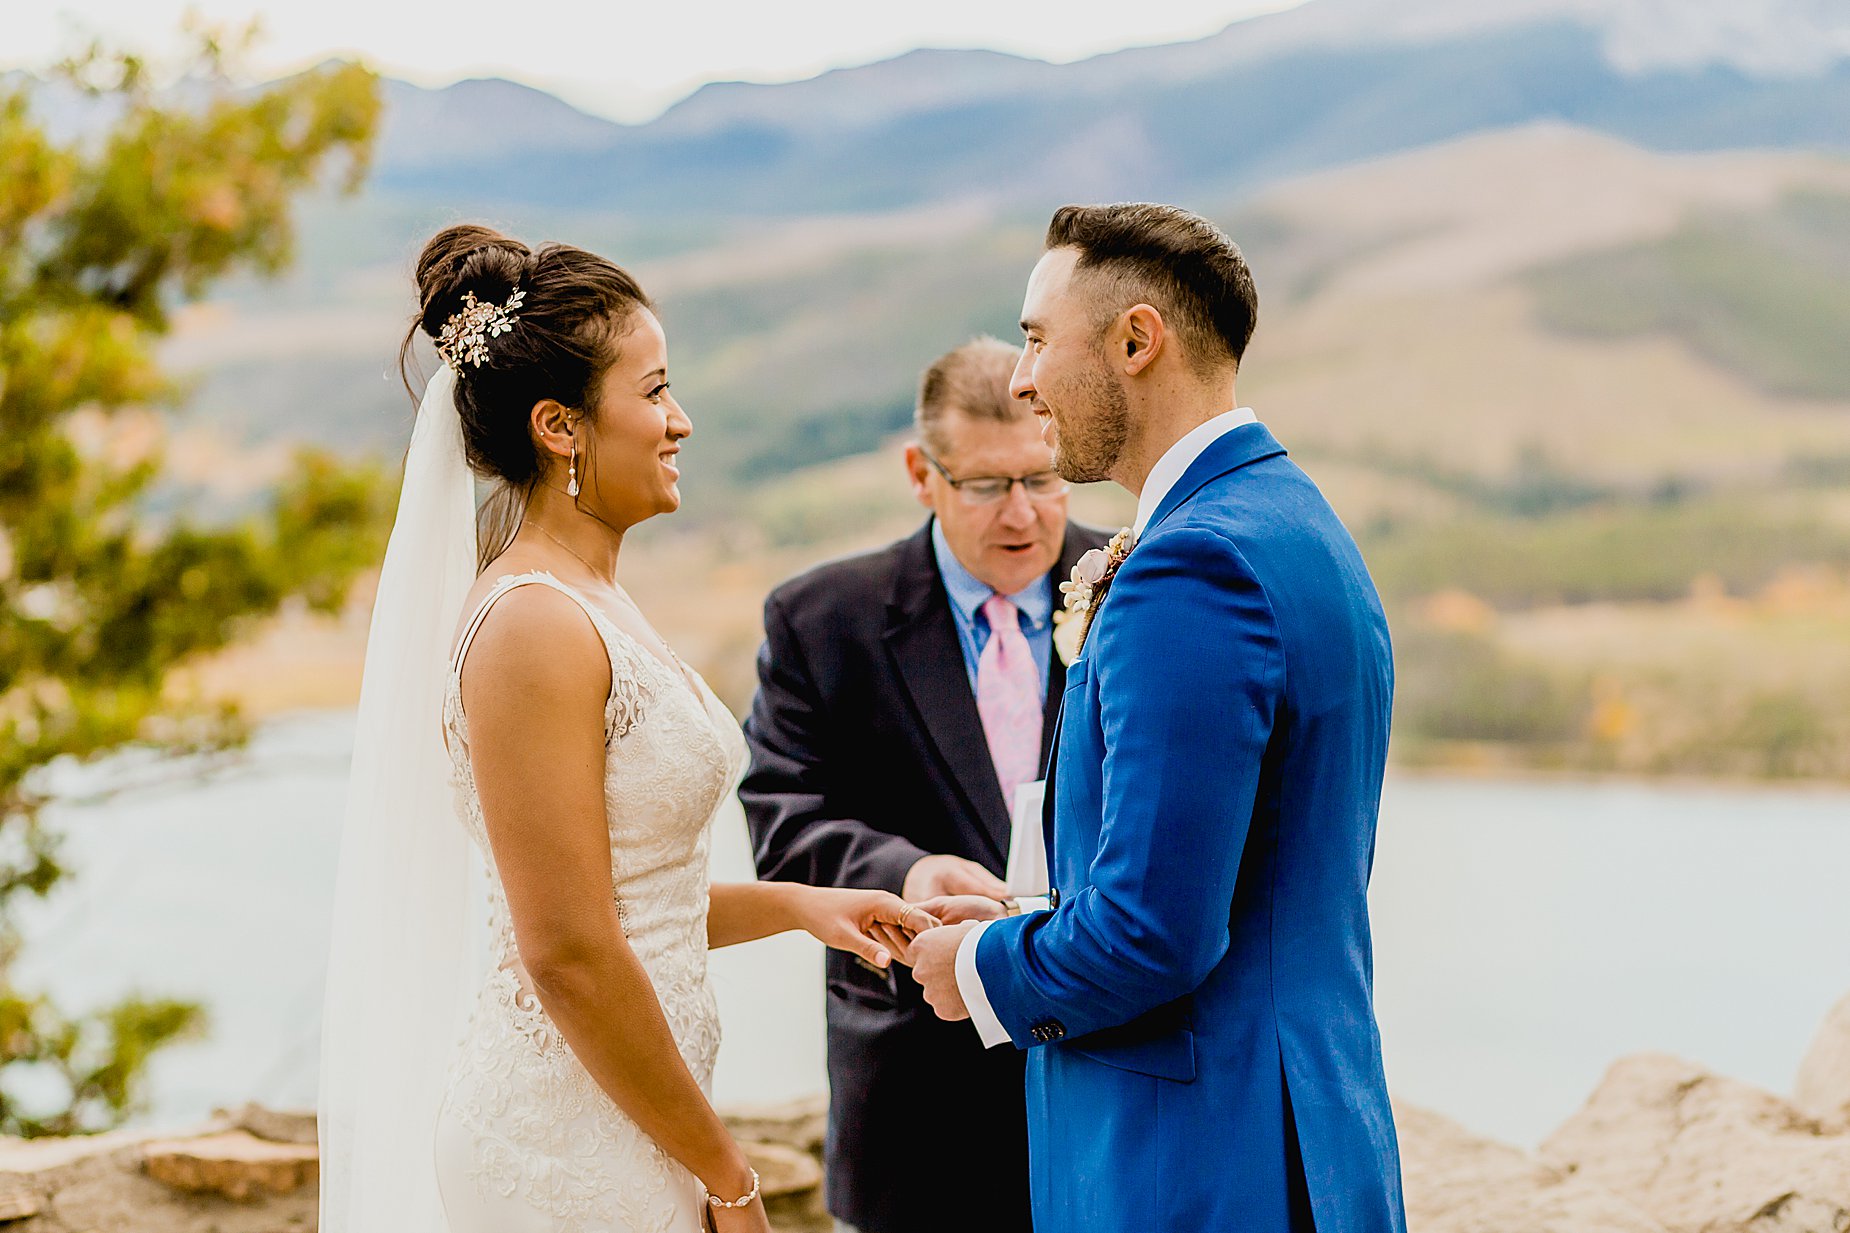 Couple has their breckenridge fall elopement ceremony at Sapphire Point with gorgeous mountain and lake views behind them, captured by Lauren Casino Photography, a Colorado elopement photographer